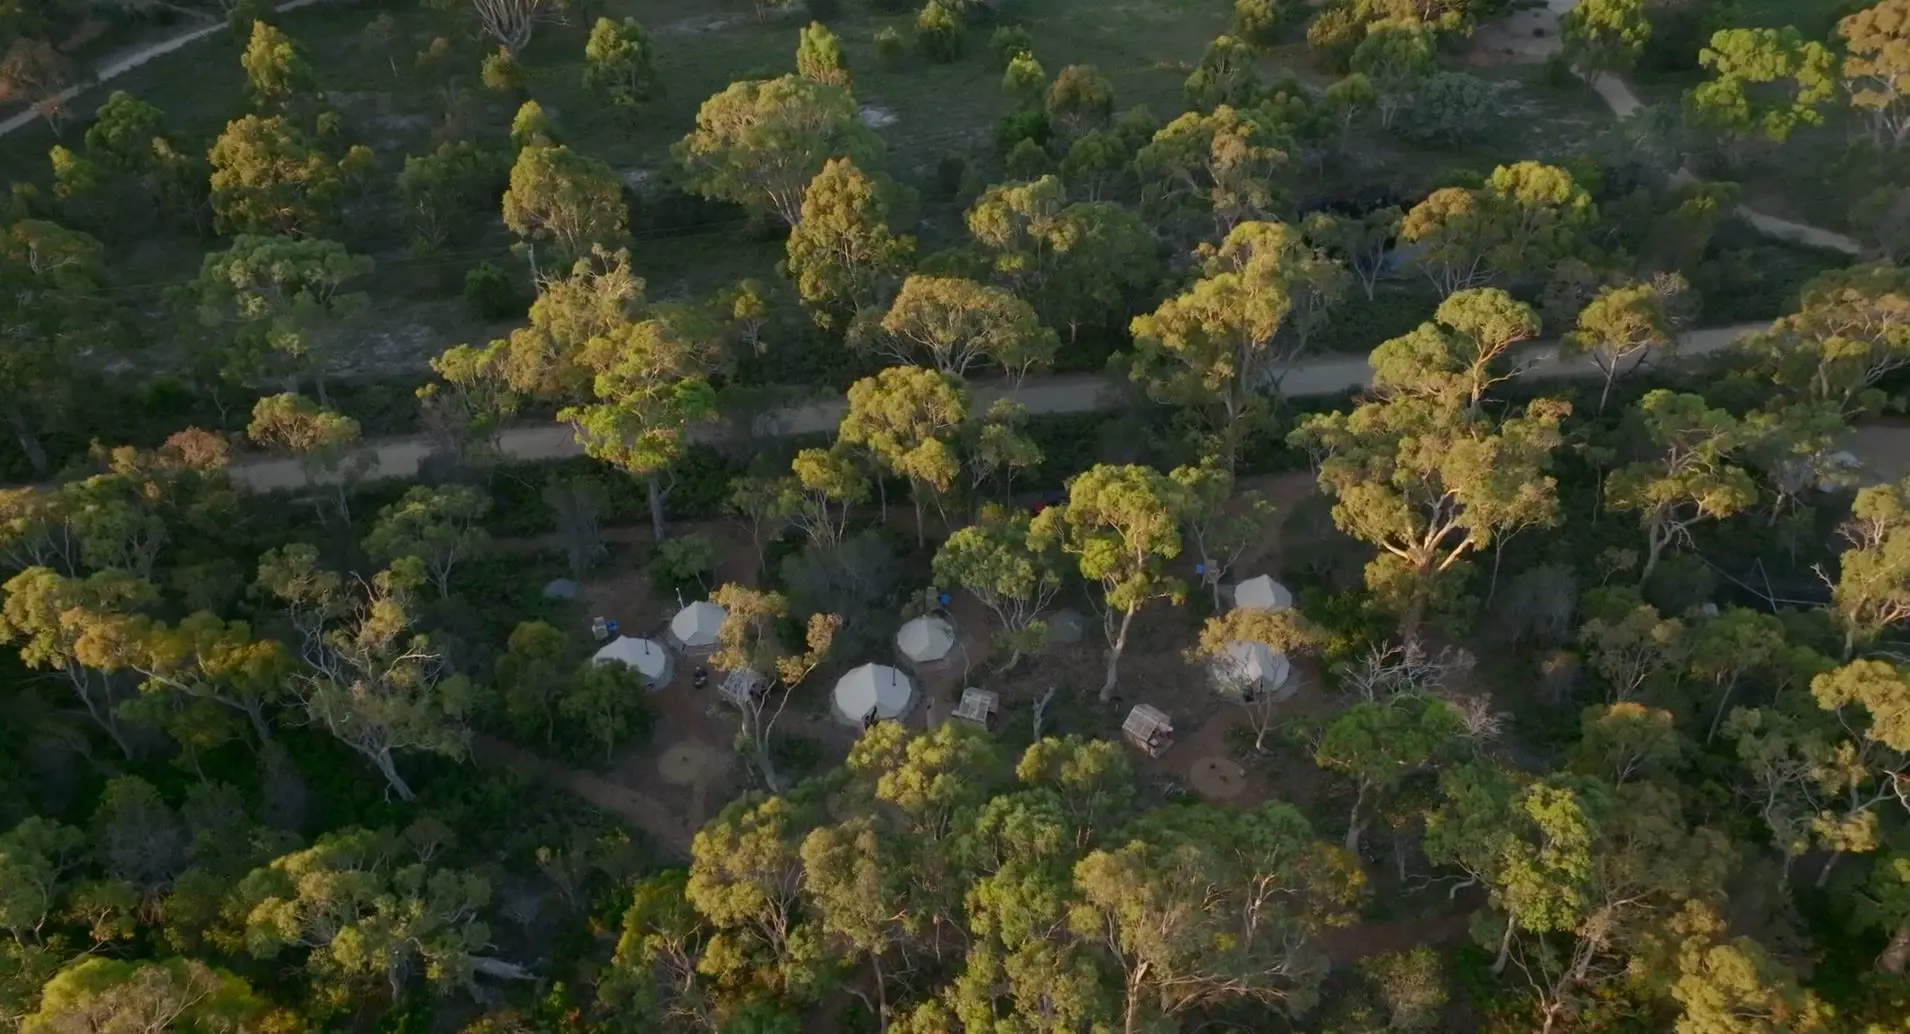 An aerial view of large canvas dome-shaped tents nestled amongst tall trees near a coast.